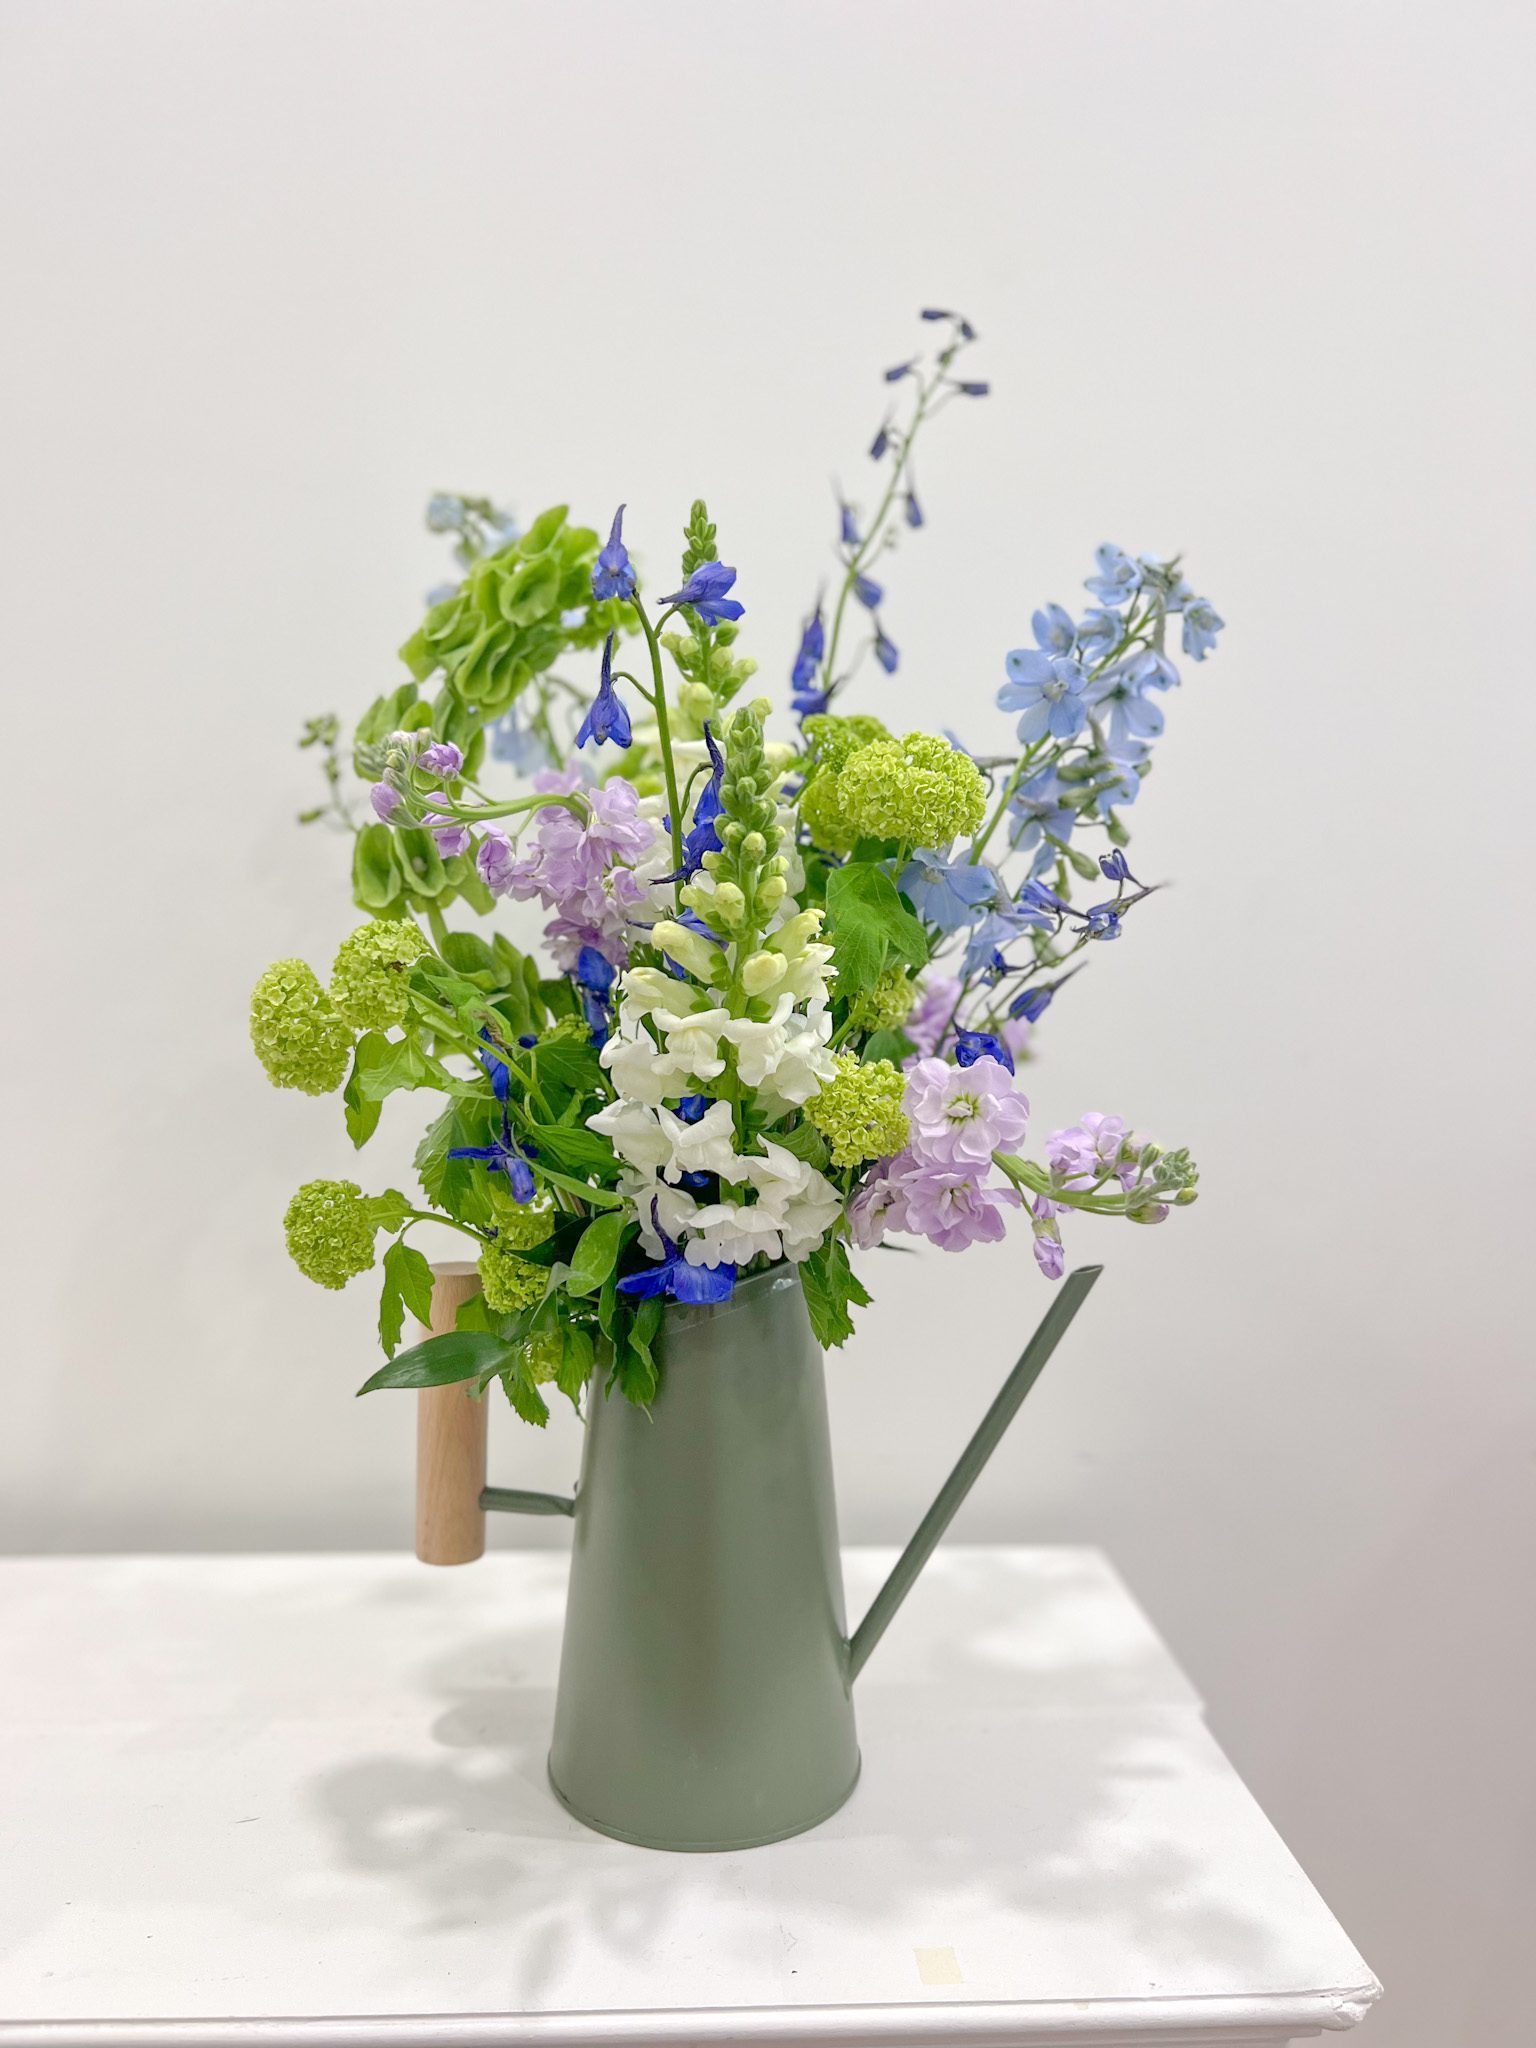 An upright garden arrangement in greens, blues and purples arranged into an olive green watering can